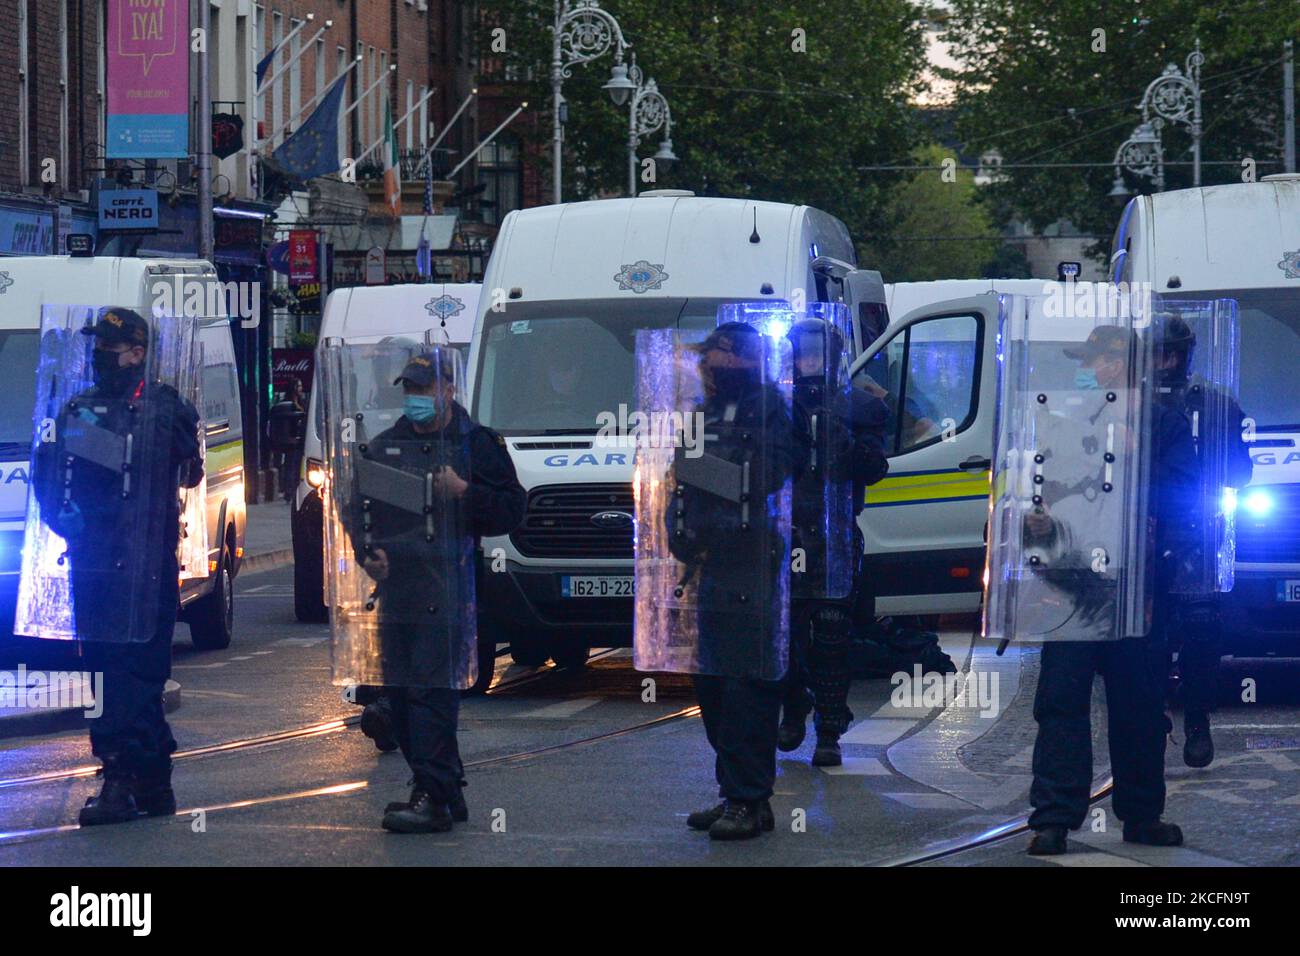 Members of Garda Public Order Unit on Dawson Street in Dublin city center on Saturday evening, 5 June 2021. Nineteen people were arrested on suspicion of violating public order after another night of rioting in downtown Dublin. Glass bottles and other missiles were thrown at the gardai after they collided with large crowds in the city on Saturday night. On Sunday, 6 June 2021, in Dublin, Ireland. (Photo by Artur Widak/NurPhoto) Stock Photo